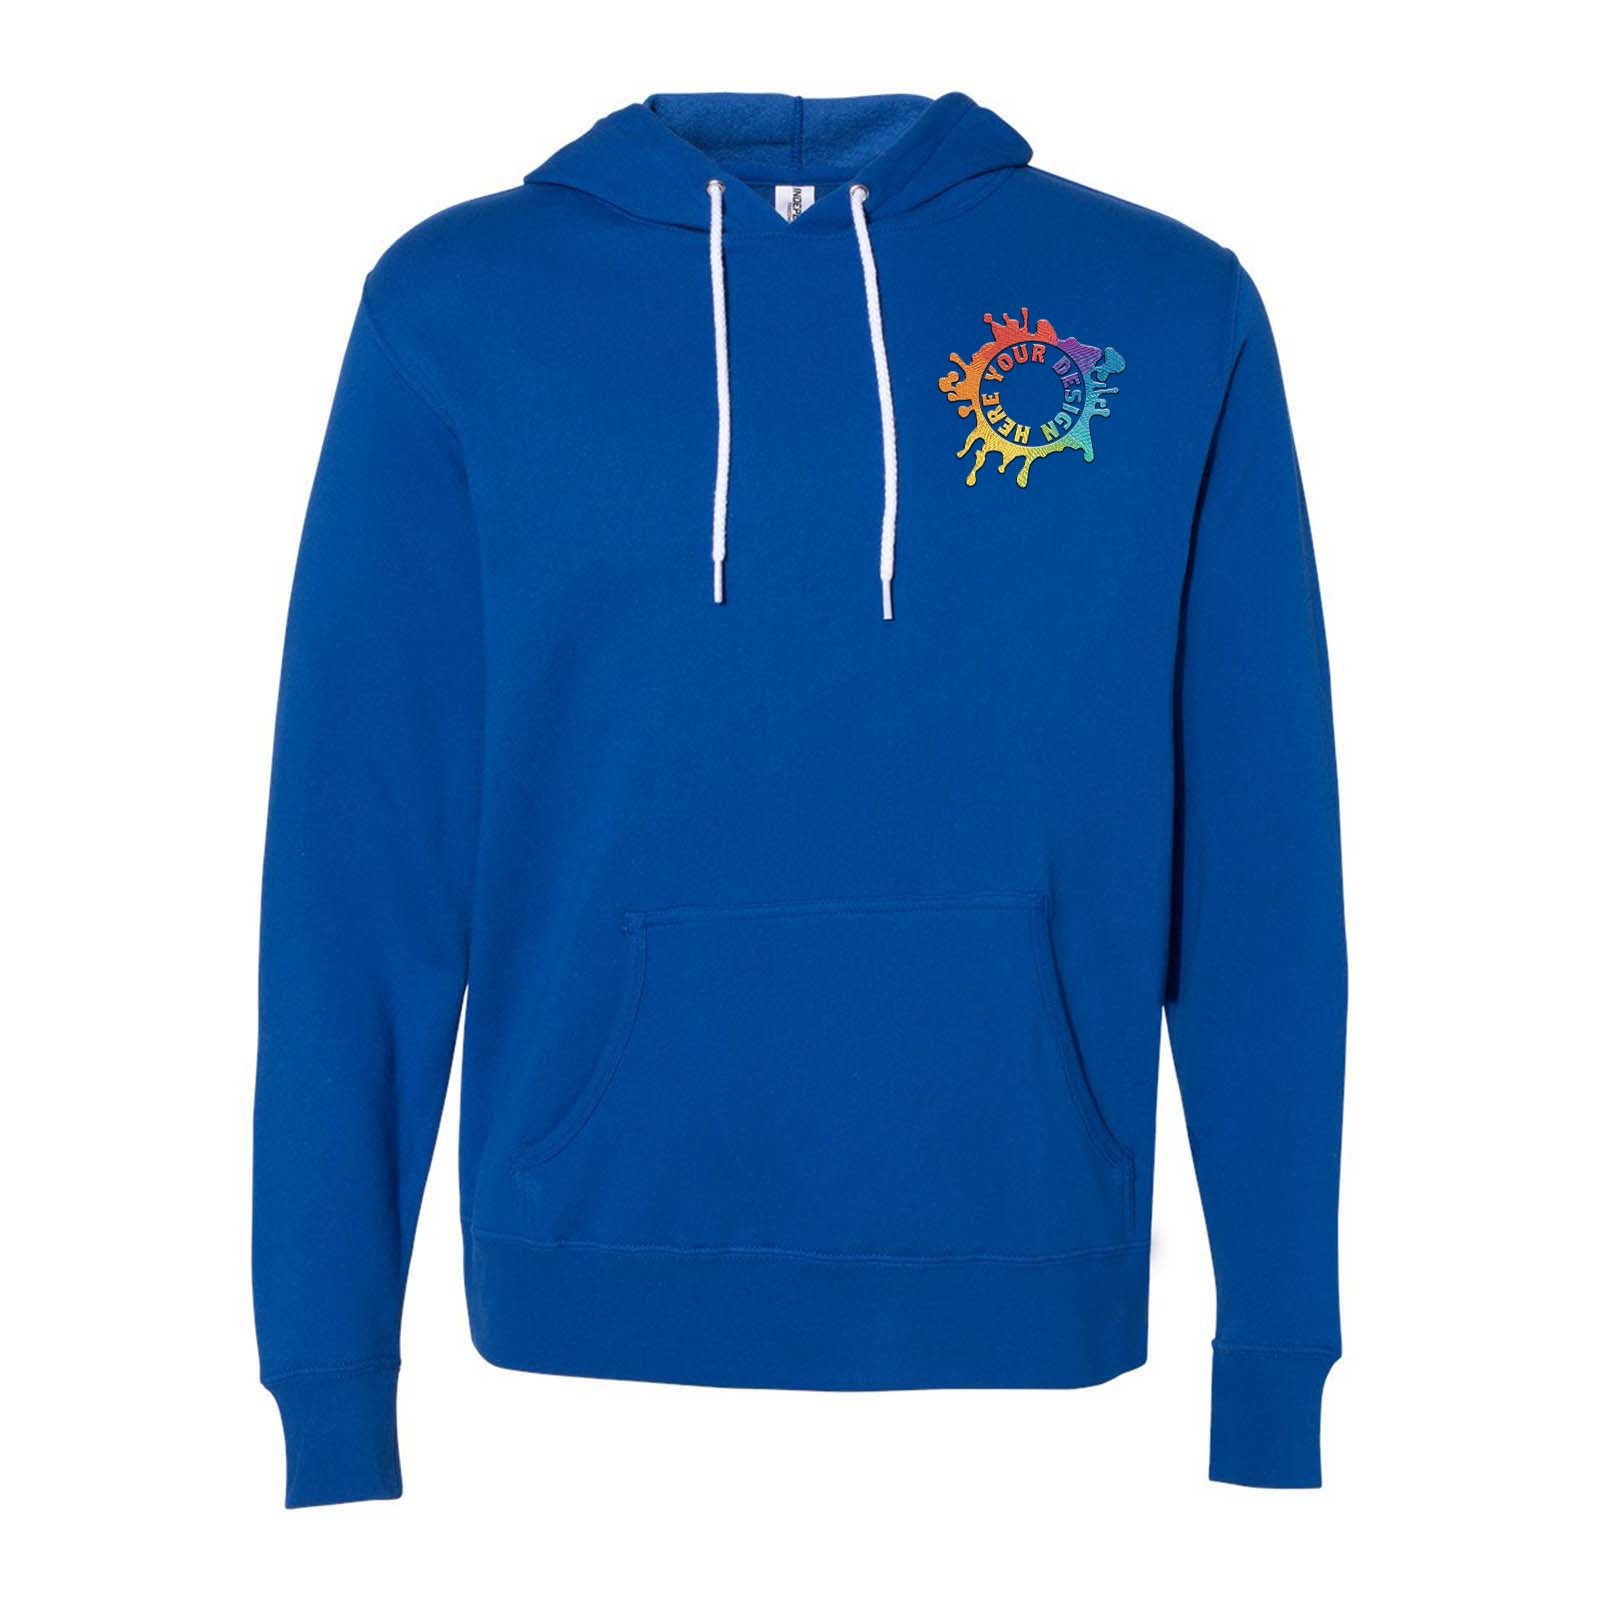 Independent Trading Co. Unisex Lightweight Hooded Sweatshirt Embroidery - Mato & Hash